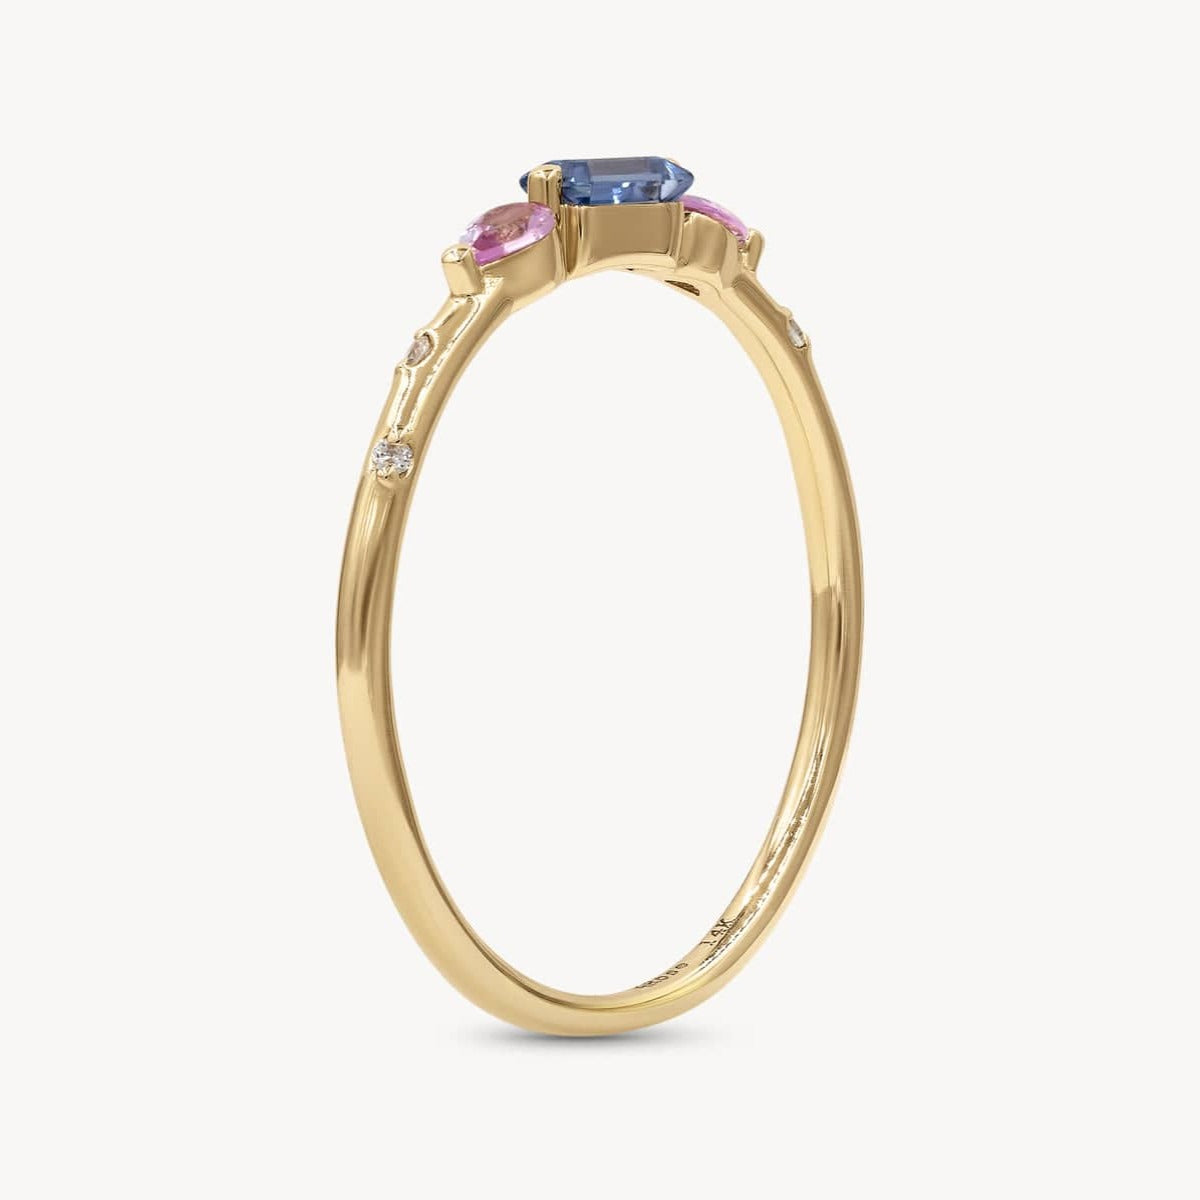 Starry Blue and Pink Sapphire Deco Ring